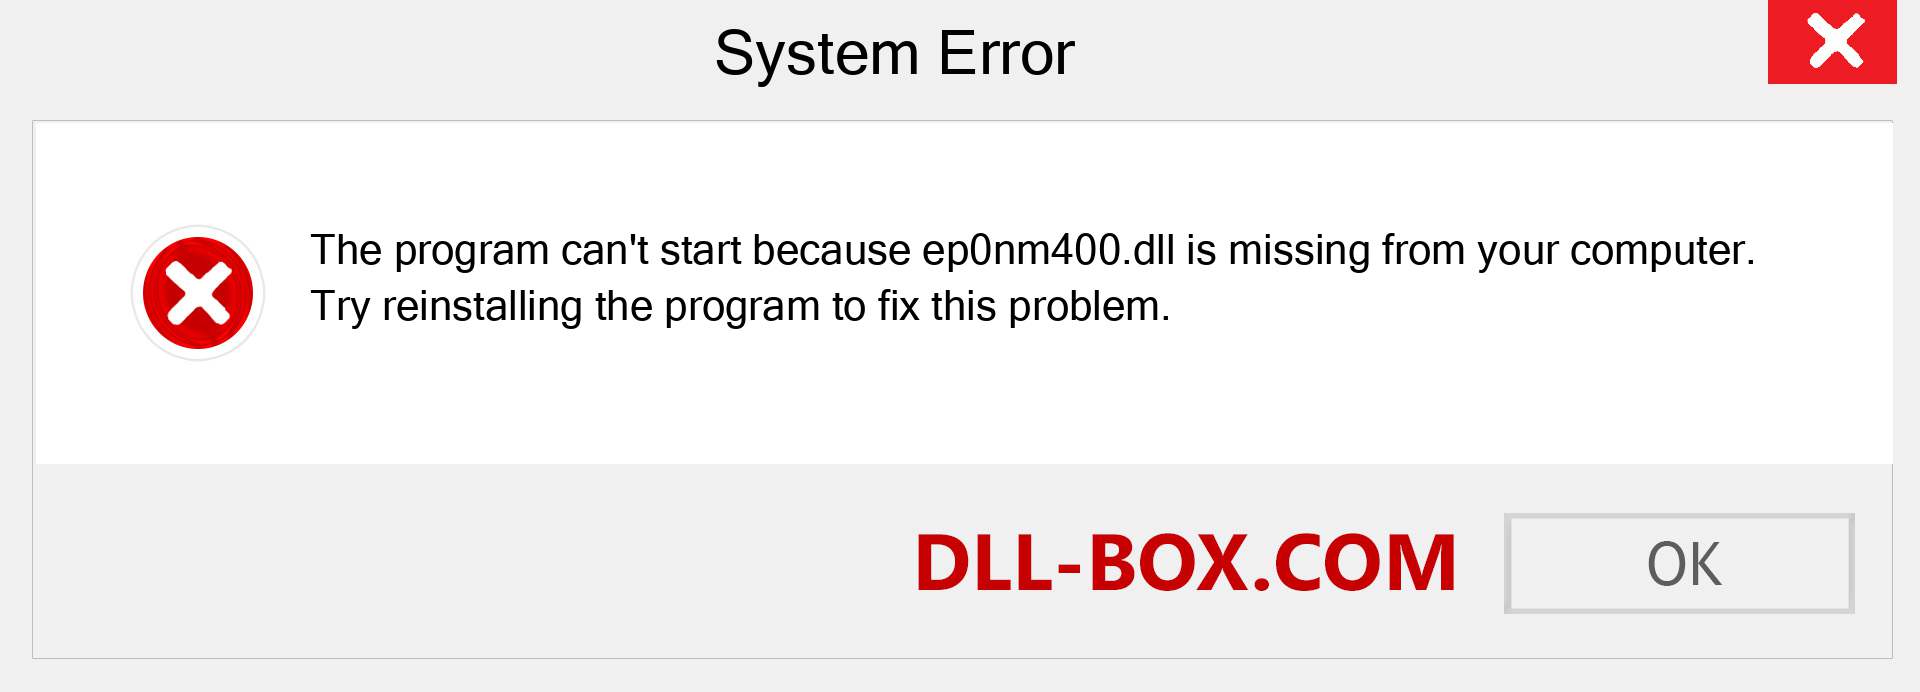  ep0nm400.dll file is missing?. Download for Windows 7, 8, 10 - Fix  ep0nm400 dll Missing Error on Windows, photos, images